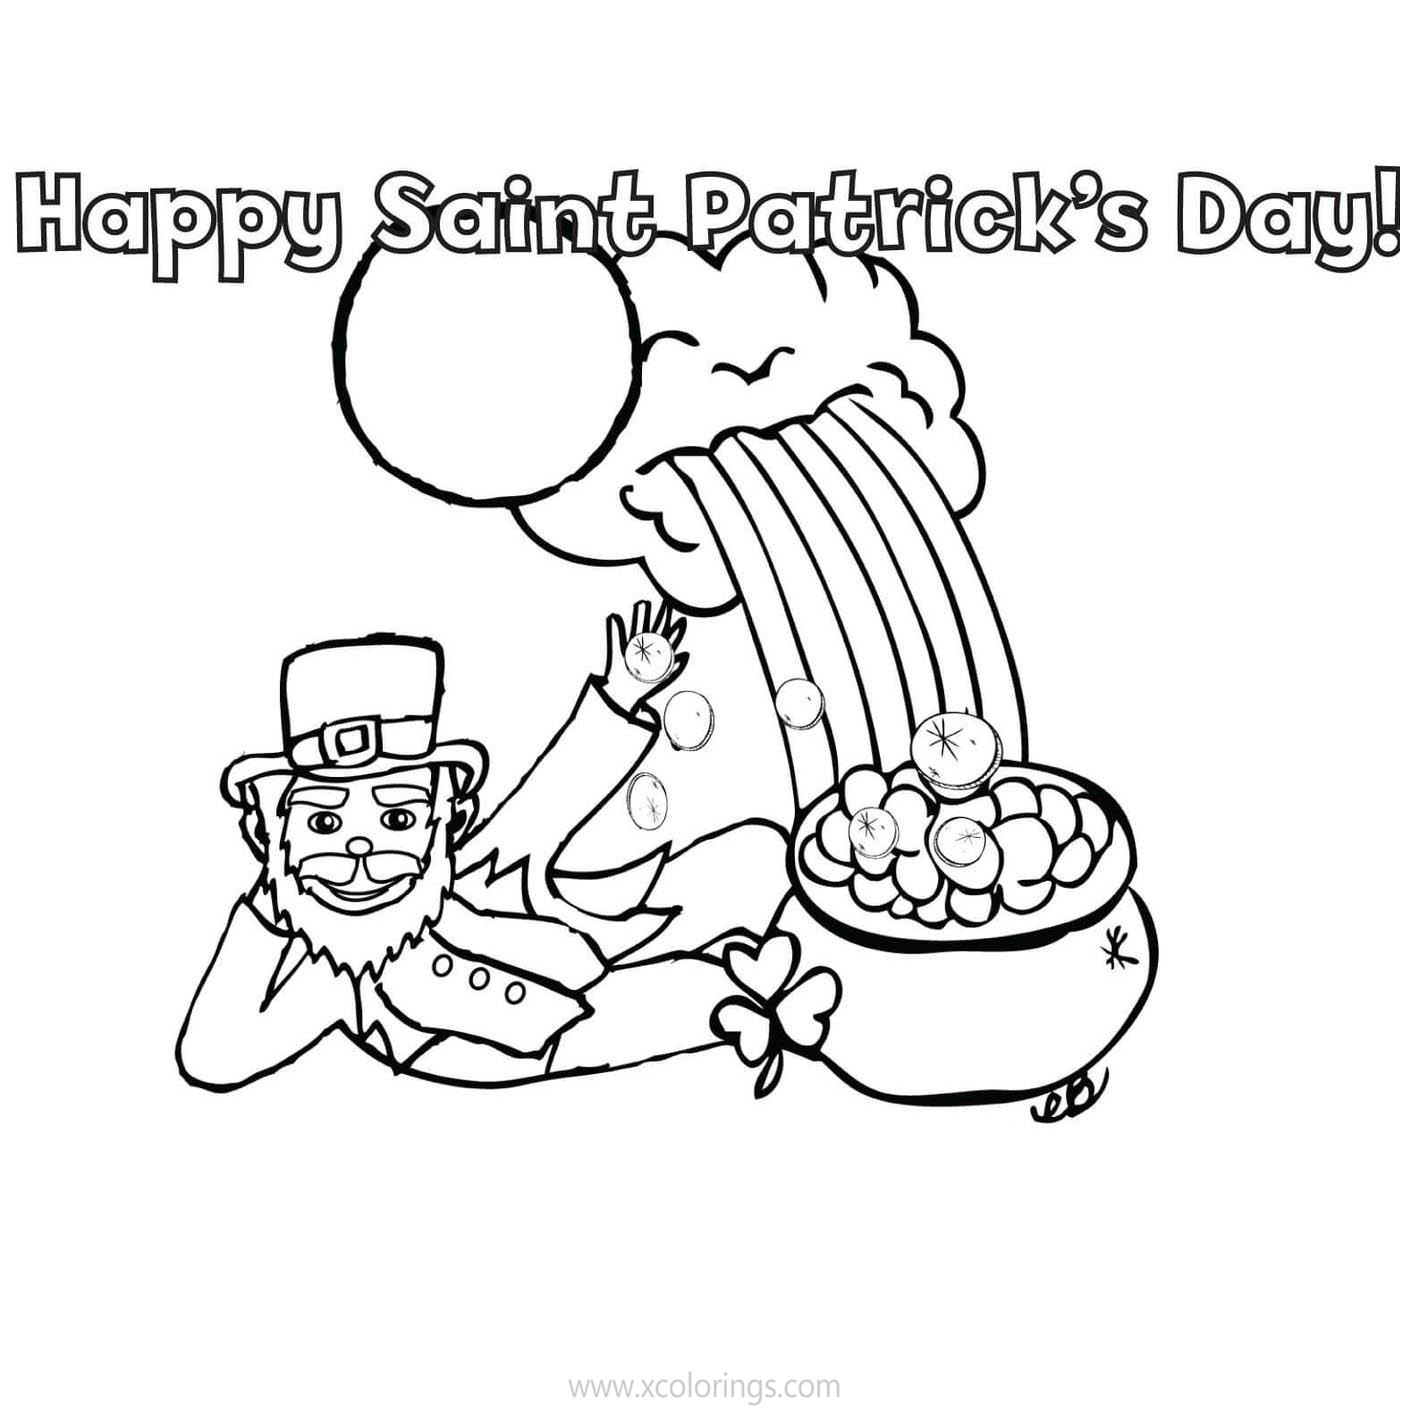 Free Funny St. Patrick's Day Leprechaun Coloring Pages printable